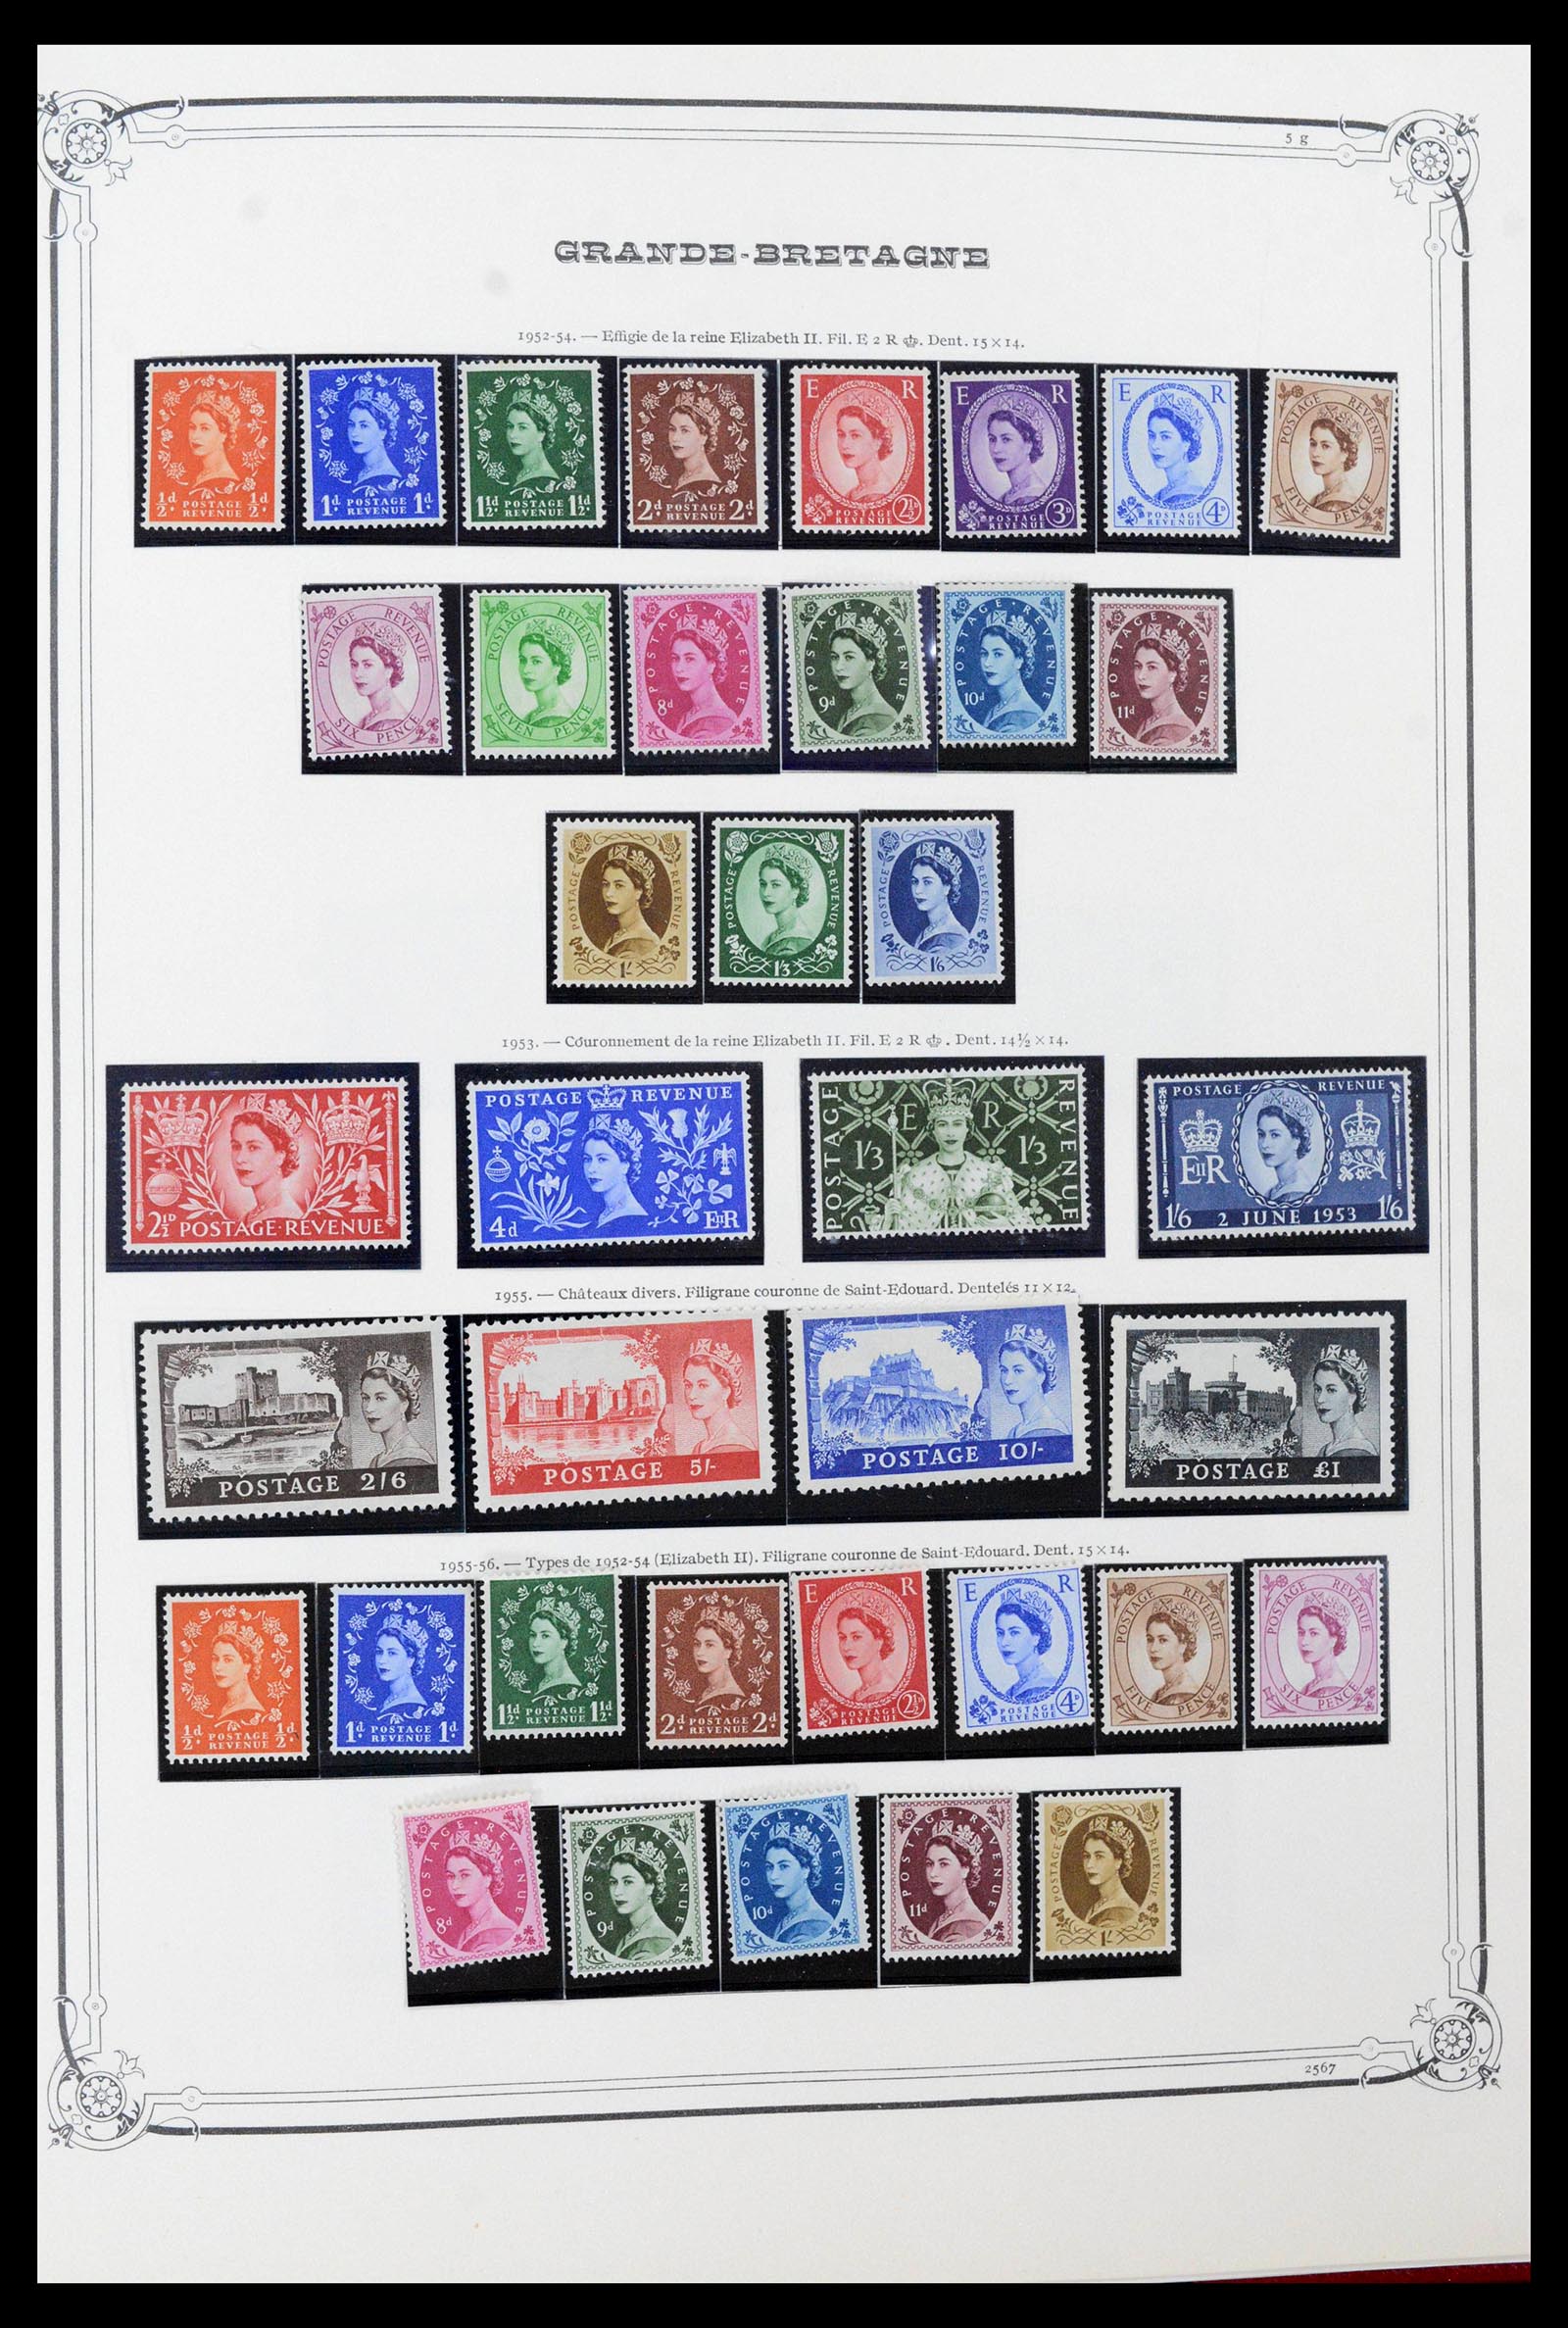 39280 0012 - Stamp collection 39280 Great Britain 1840-1981.